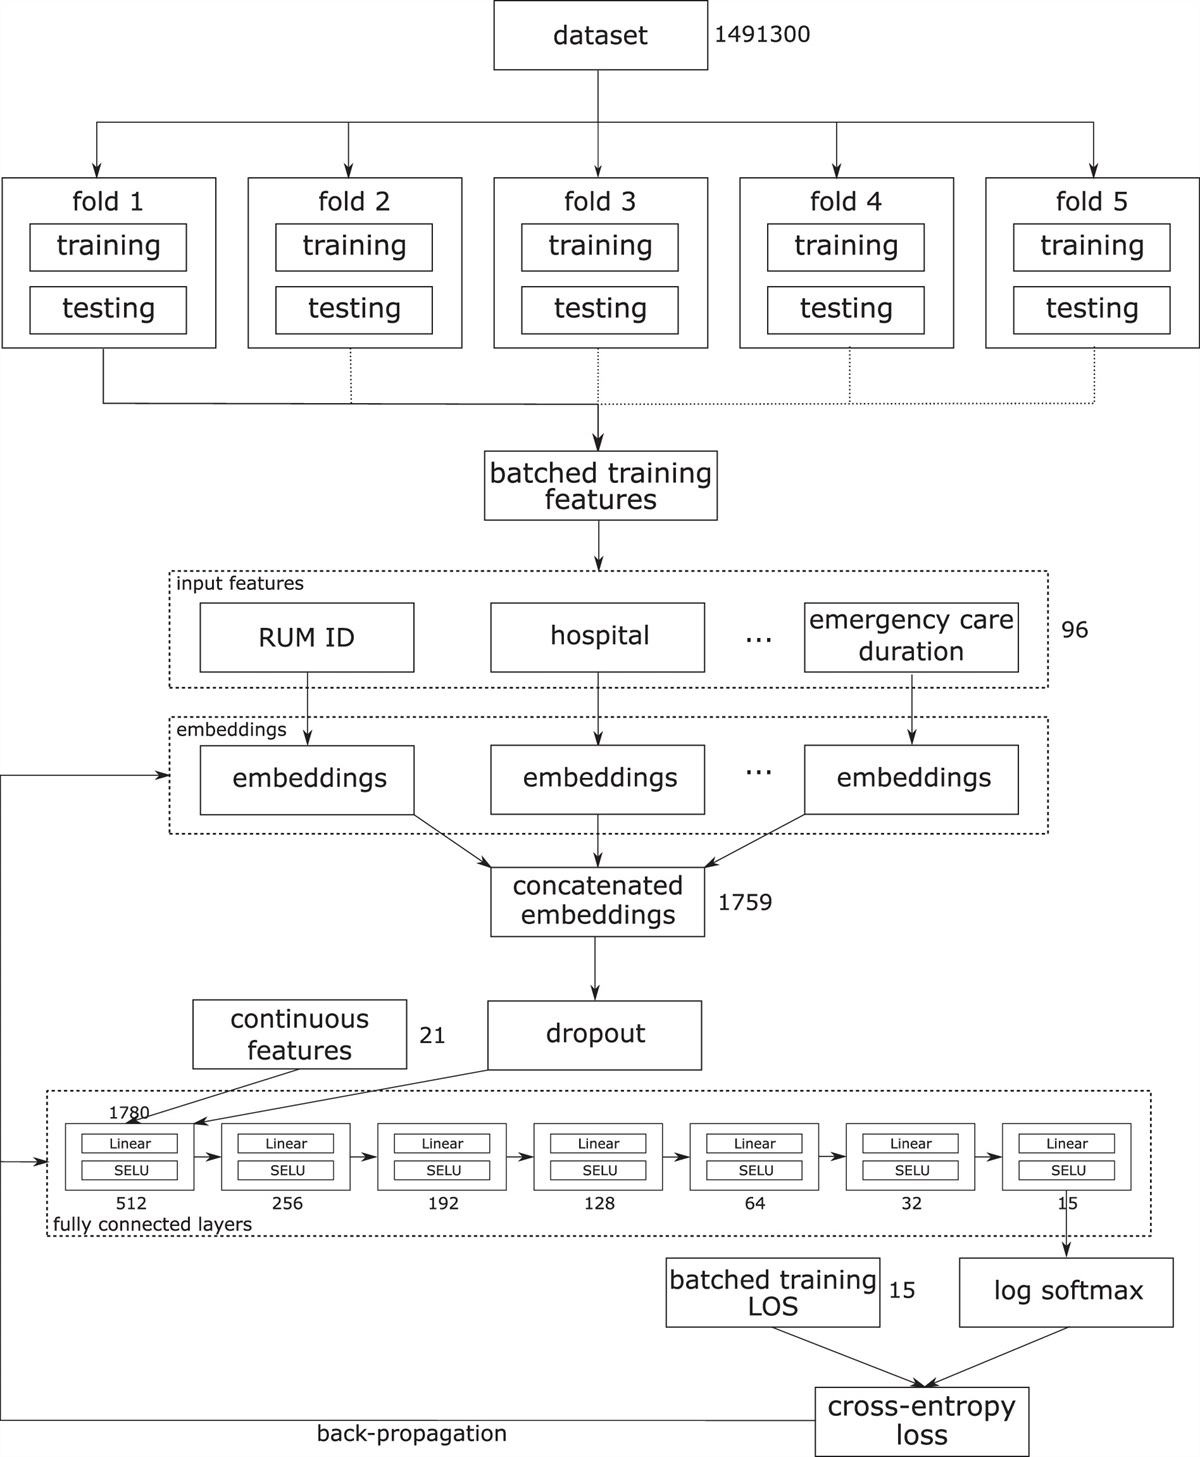 Length of Stay Prediction With Standardized Hospital Data From Acute and Emergency Care Using a Deep Neural Network